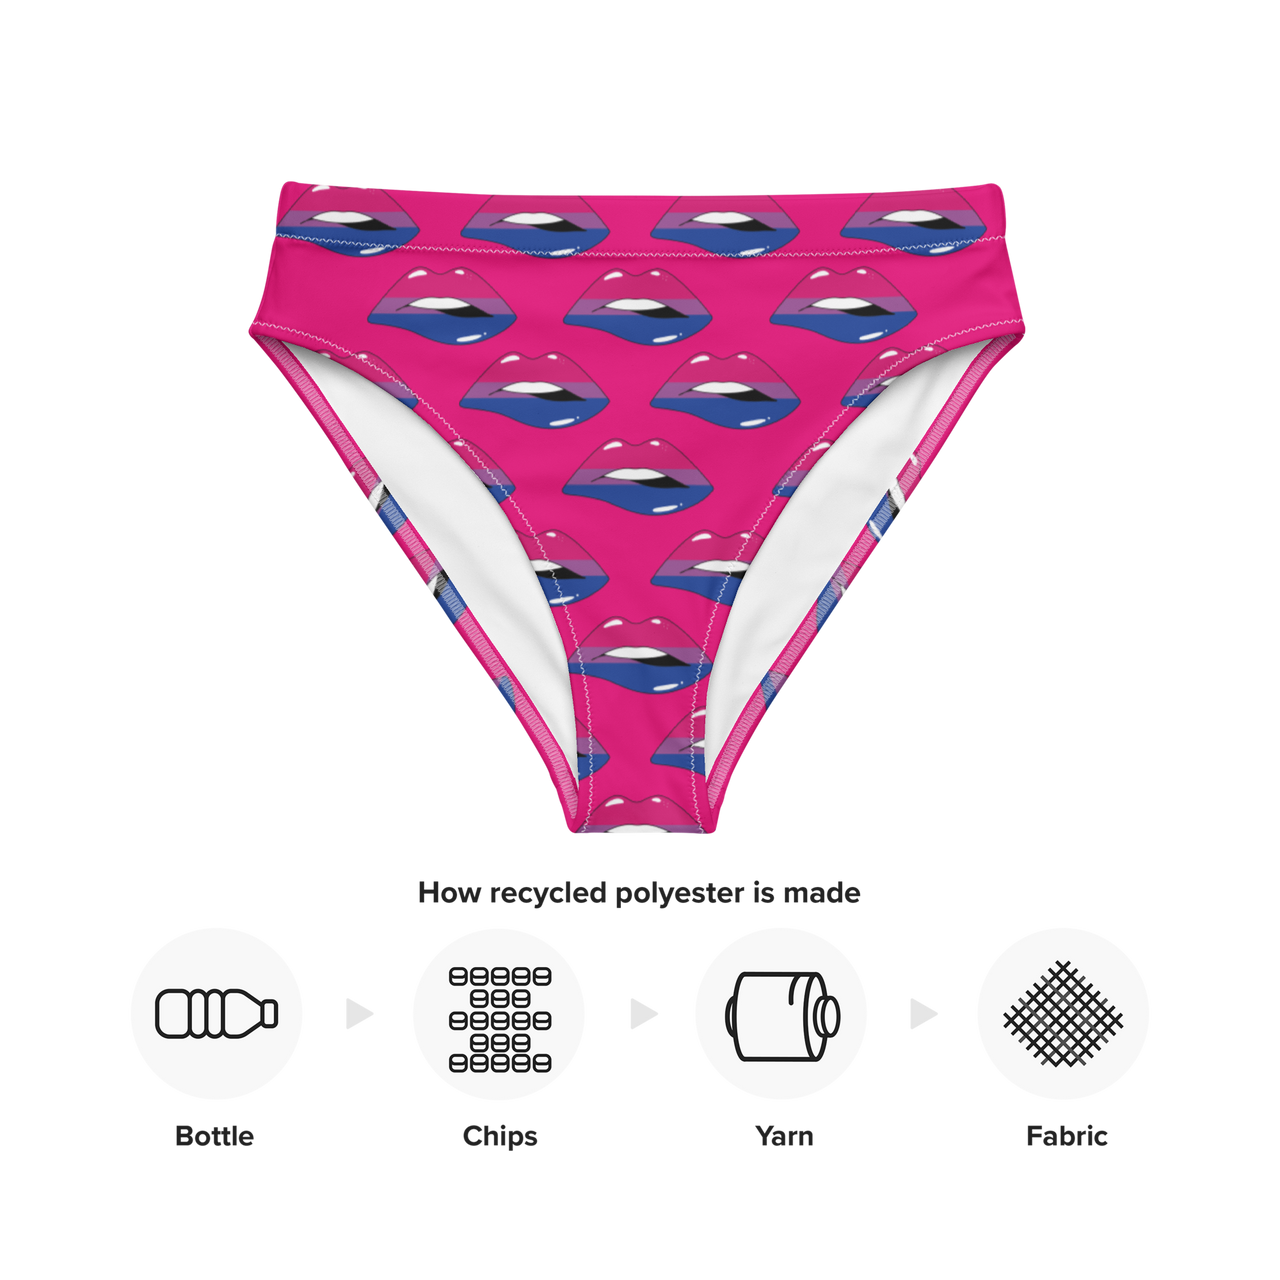 Bisexual Flag LGBTQ Kisses Underwear for They/Them Him/Her - Pink SHAVA